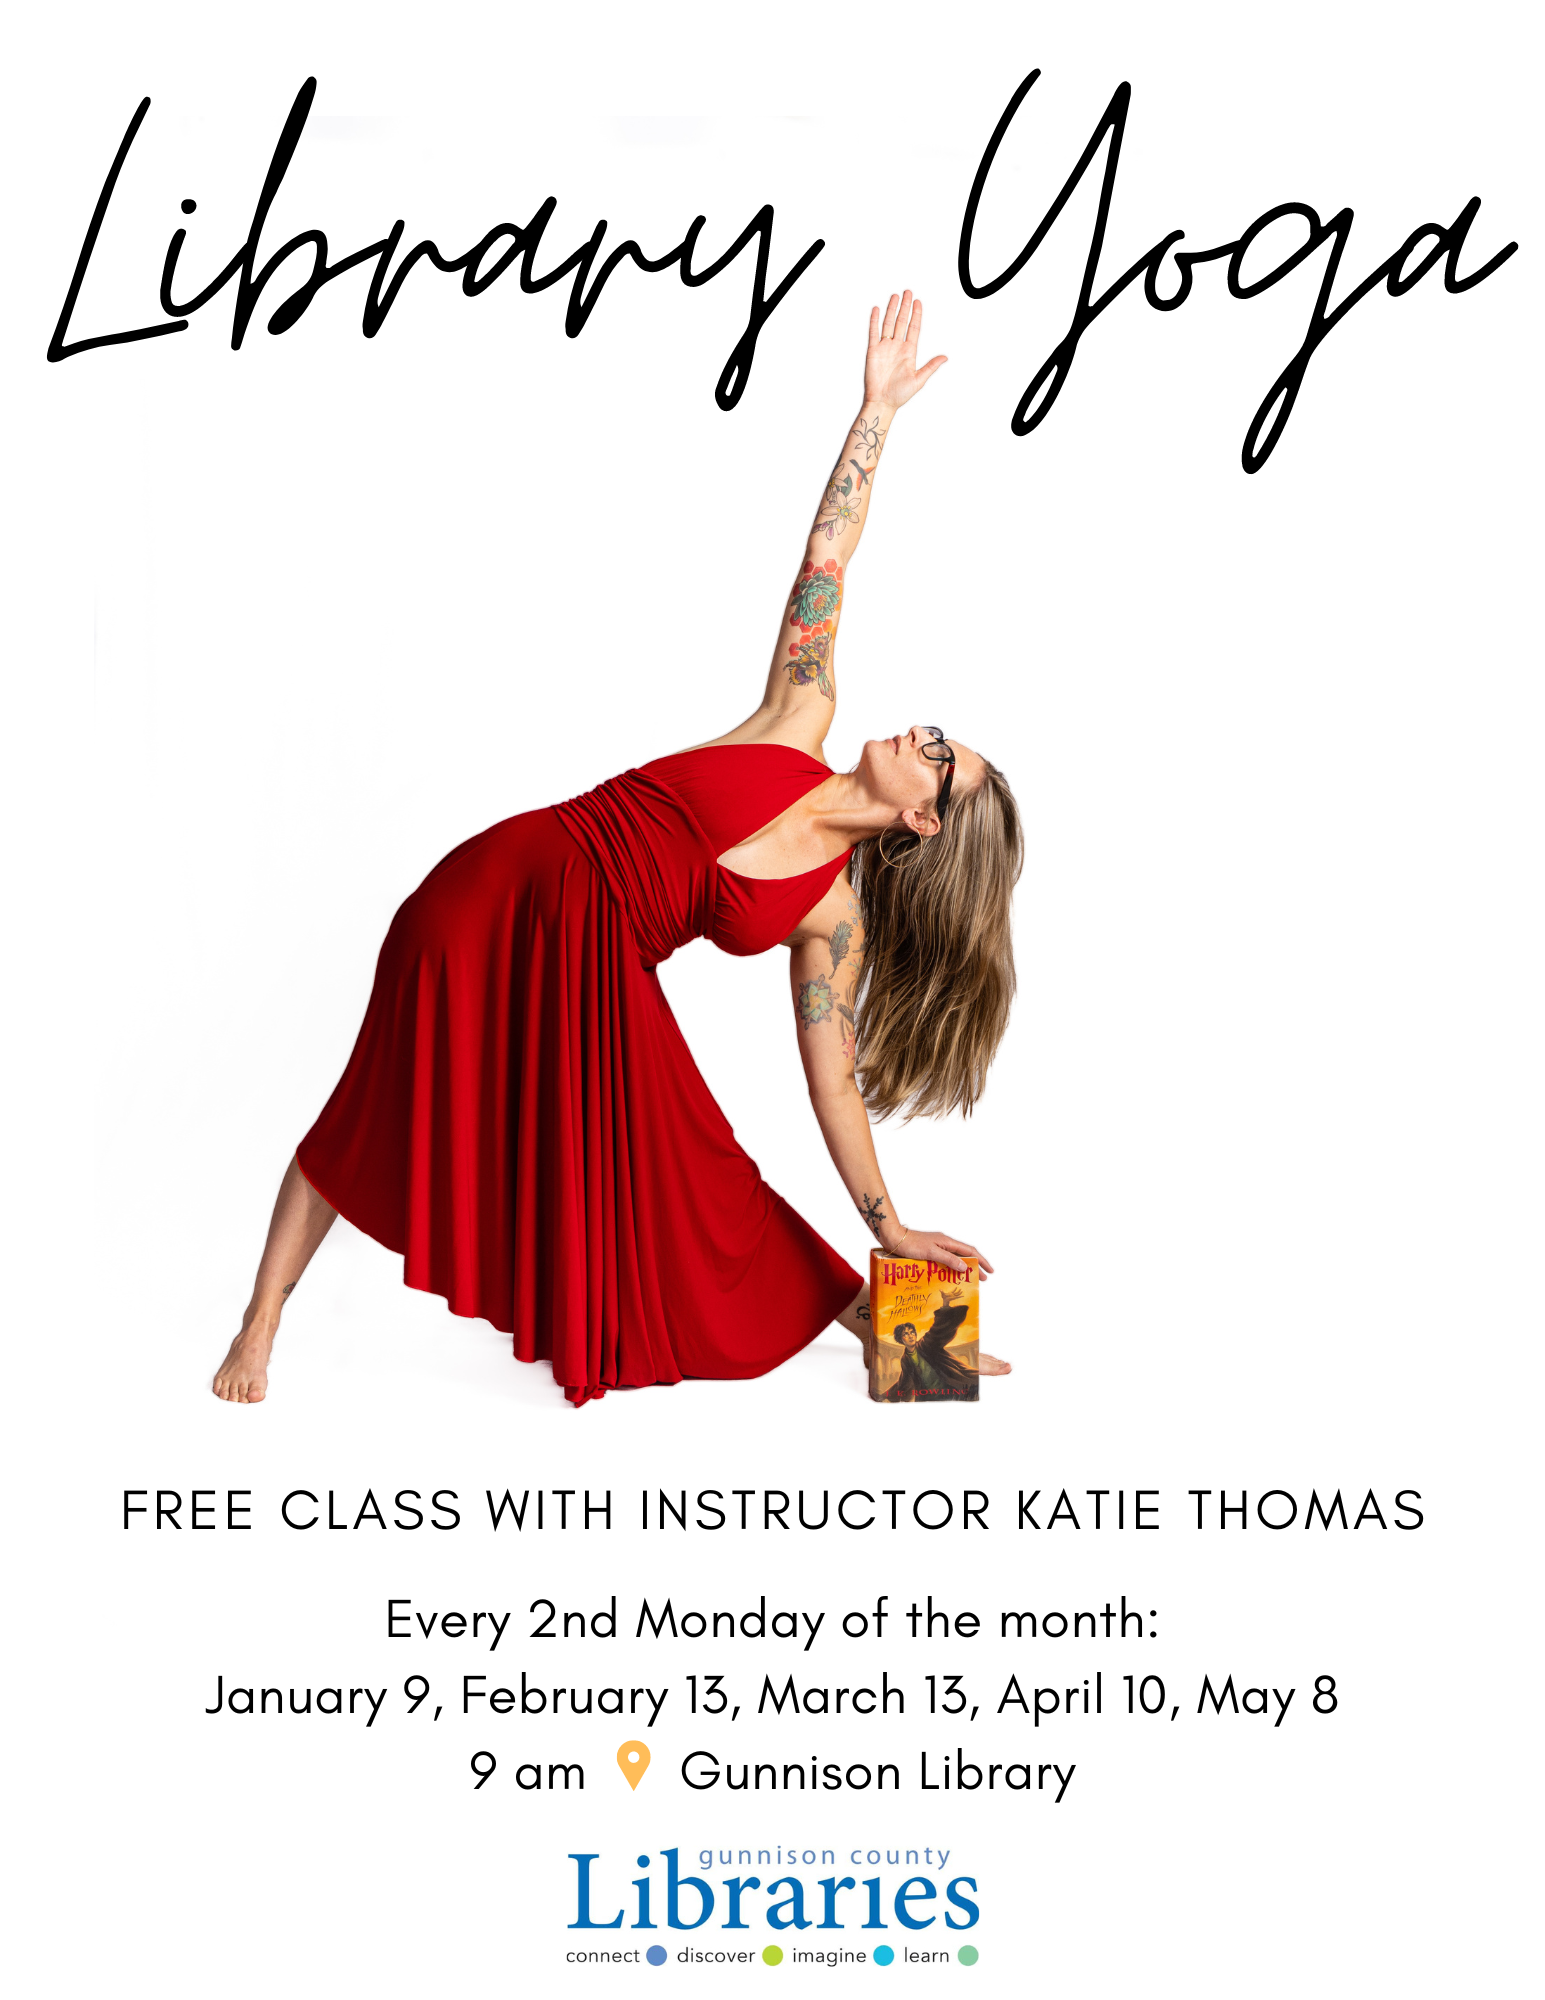 library yoga | free class with instructor katie thomas | every 2nd monday of the month: January 9, February 13, March 13, April 10, May 8 | 9 am at Gunnison Library